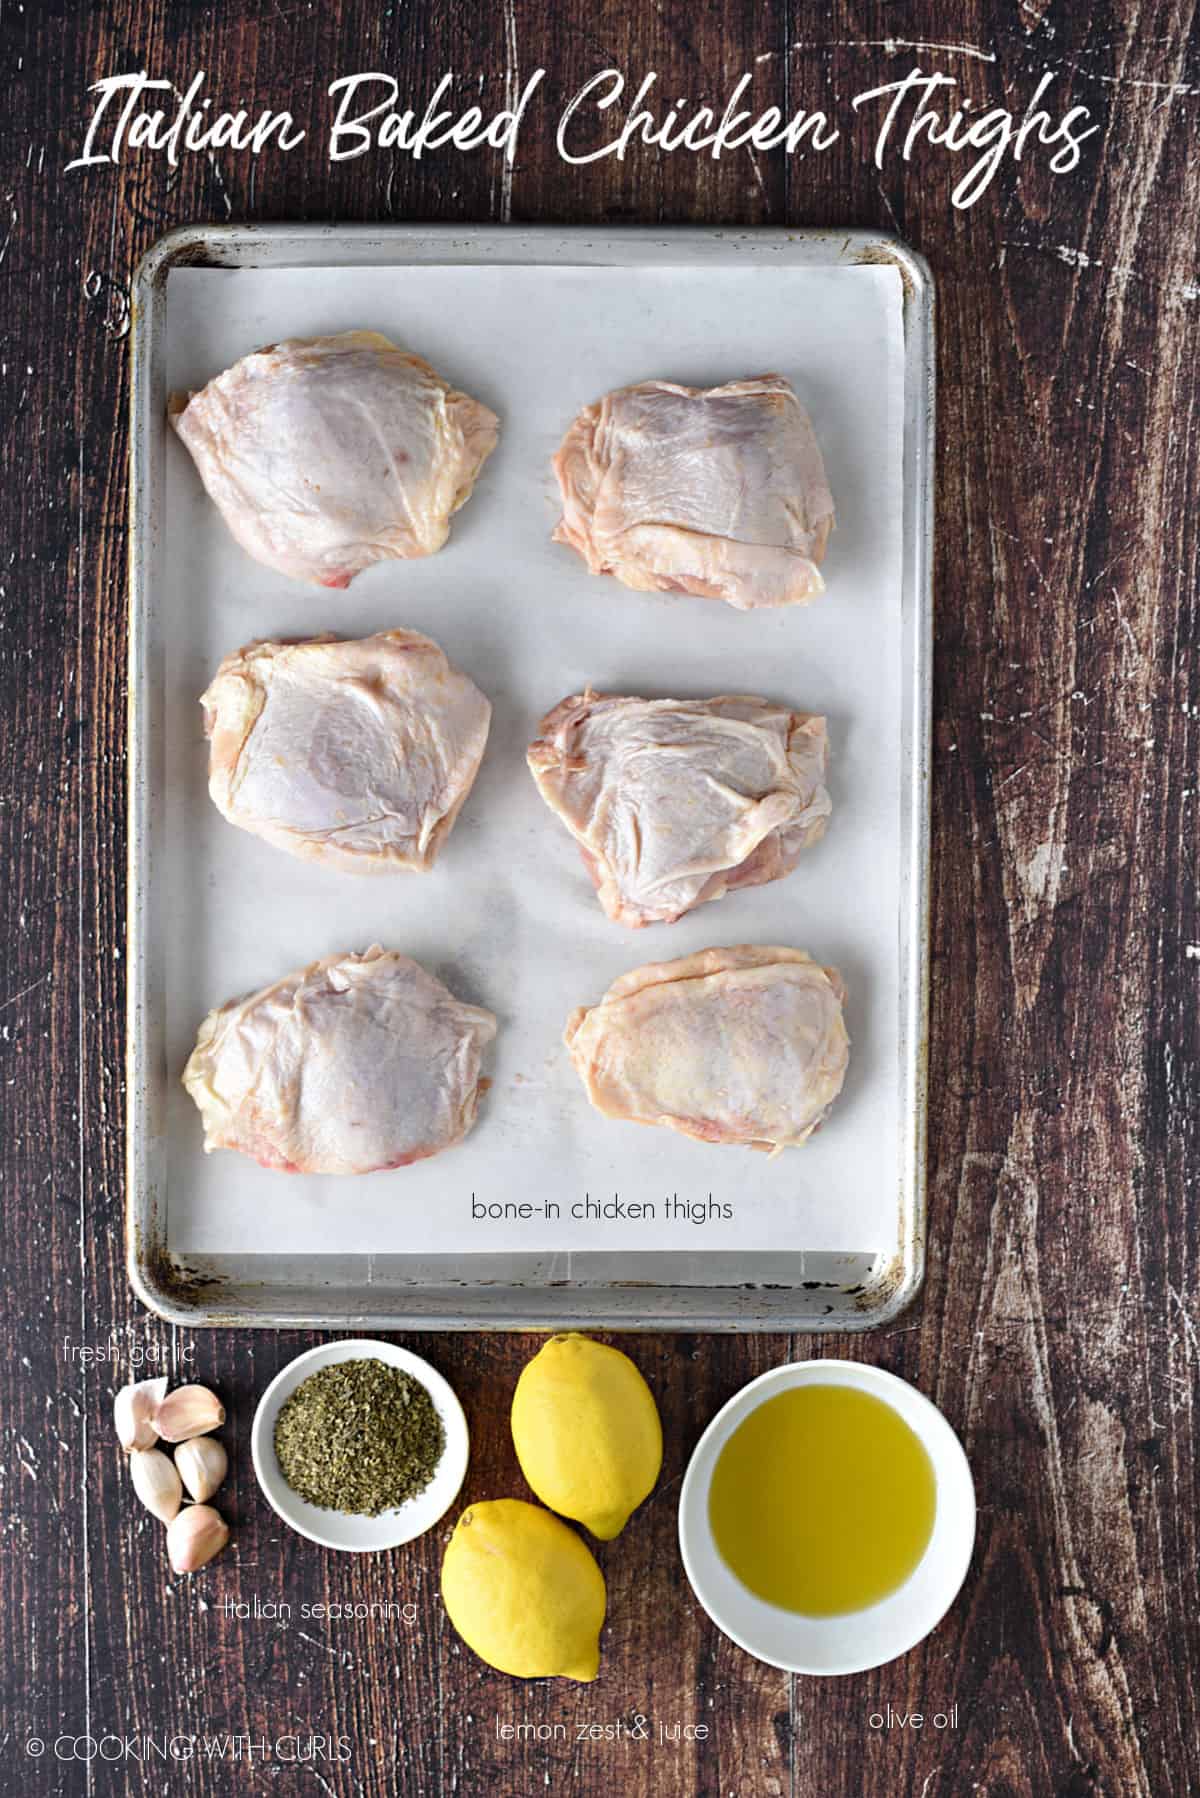 Ingredients to make Italian Baked Chicken Thighs; bone-in chicken thighs, garlic, Italian seasoning, lemons and olive oil. 